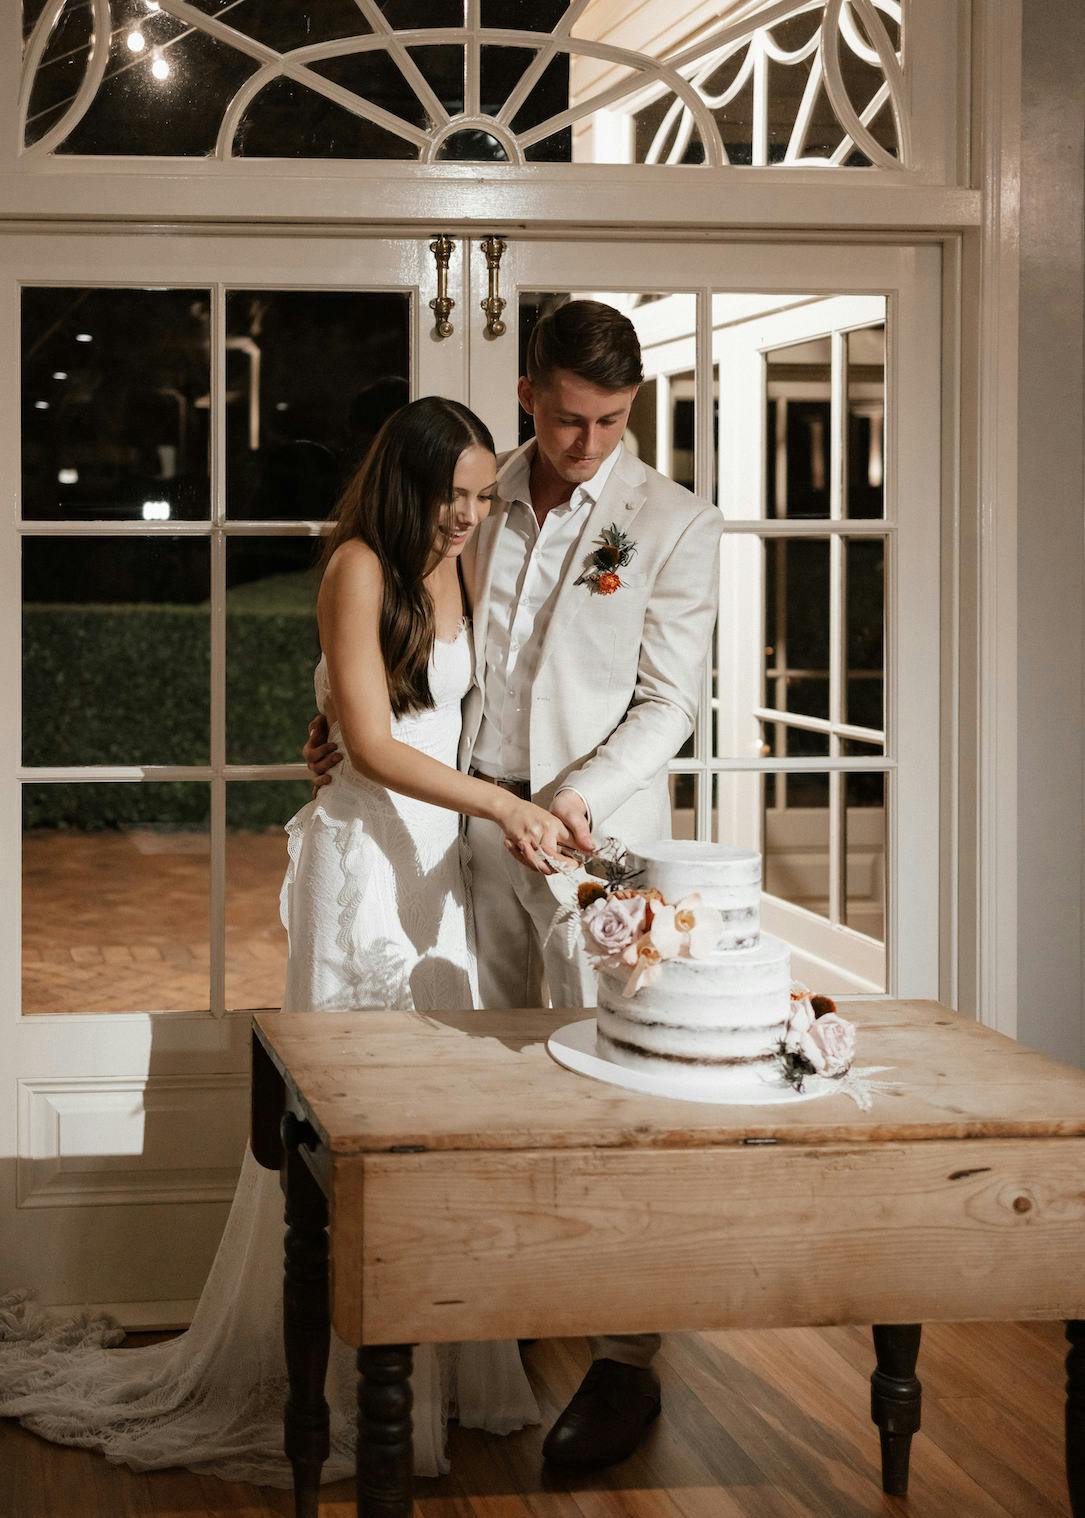 A couple in wedding attire stands together, cutting a tiered white cake decorated with pink flowers. They are in front of a large, ornate window, and the setting appears elegant and intimate. The bride wears a white dress, and the groom is in a light-colored suit.